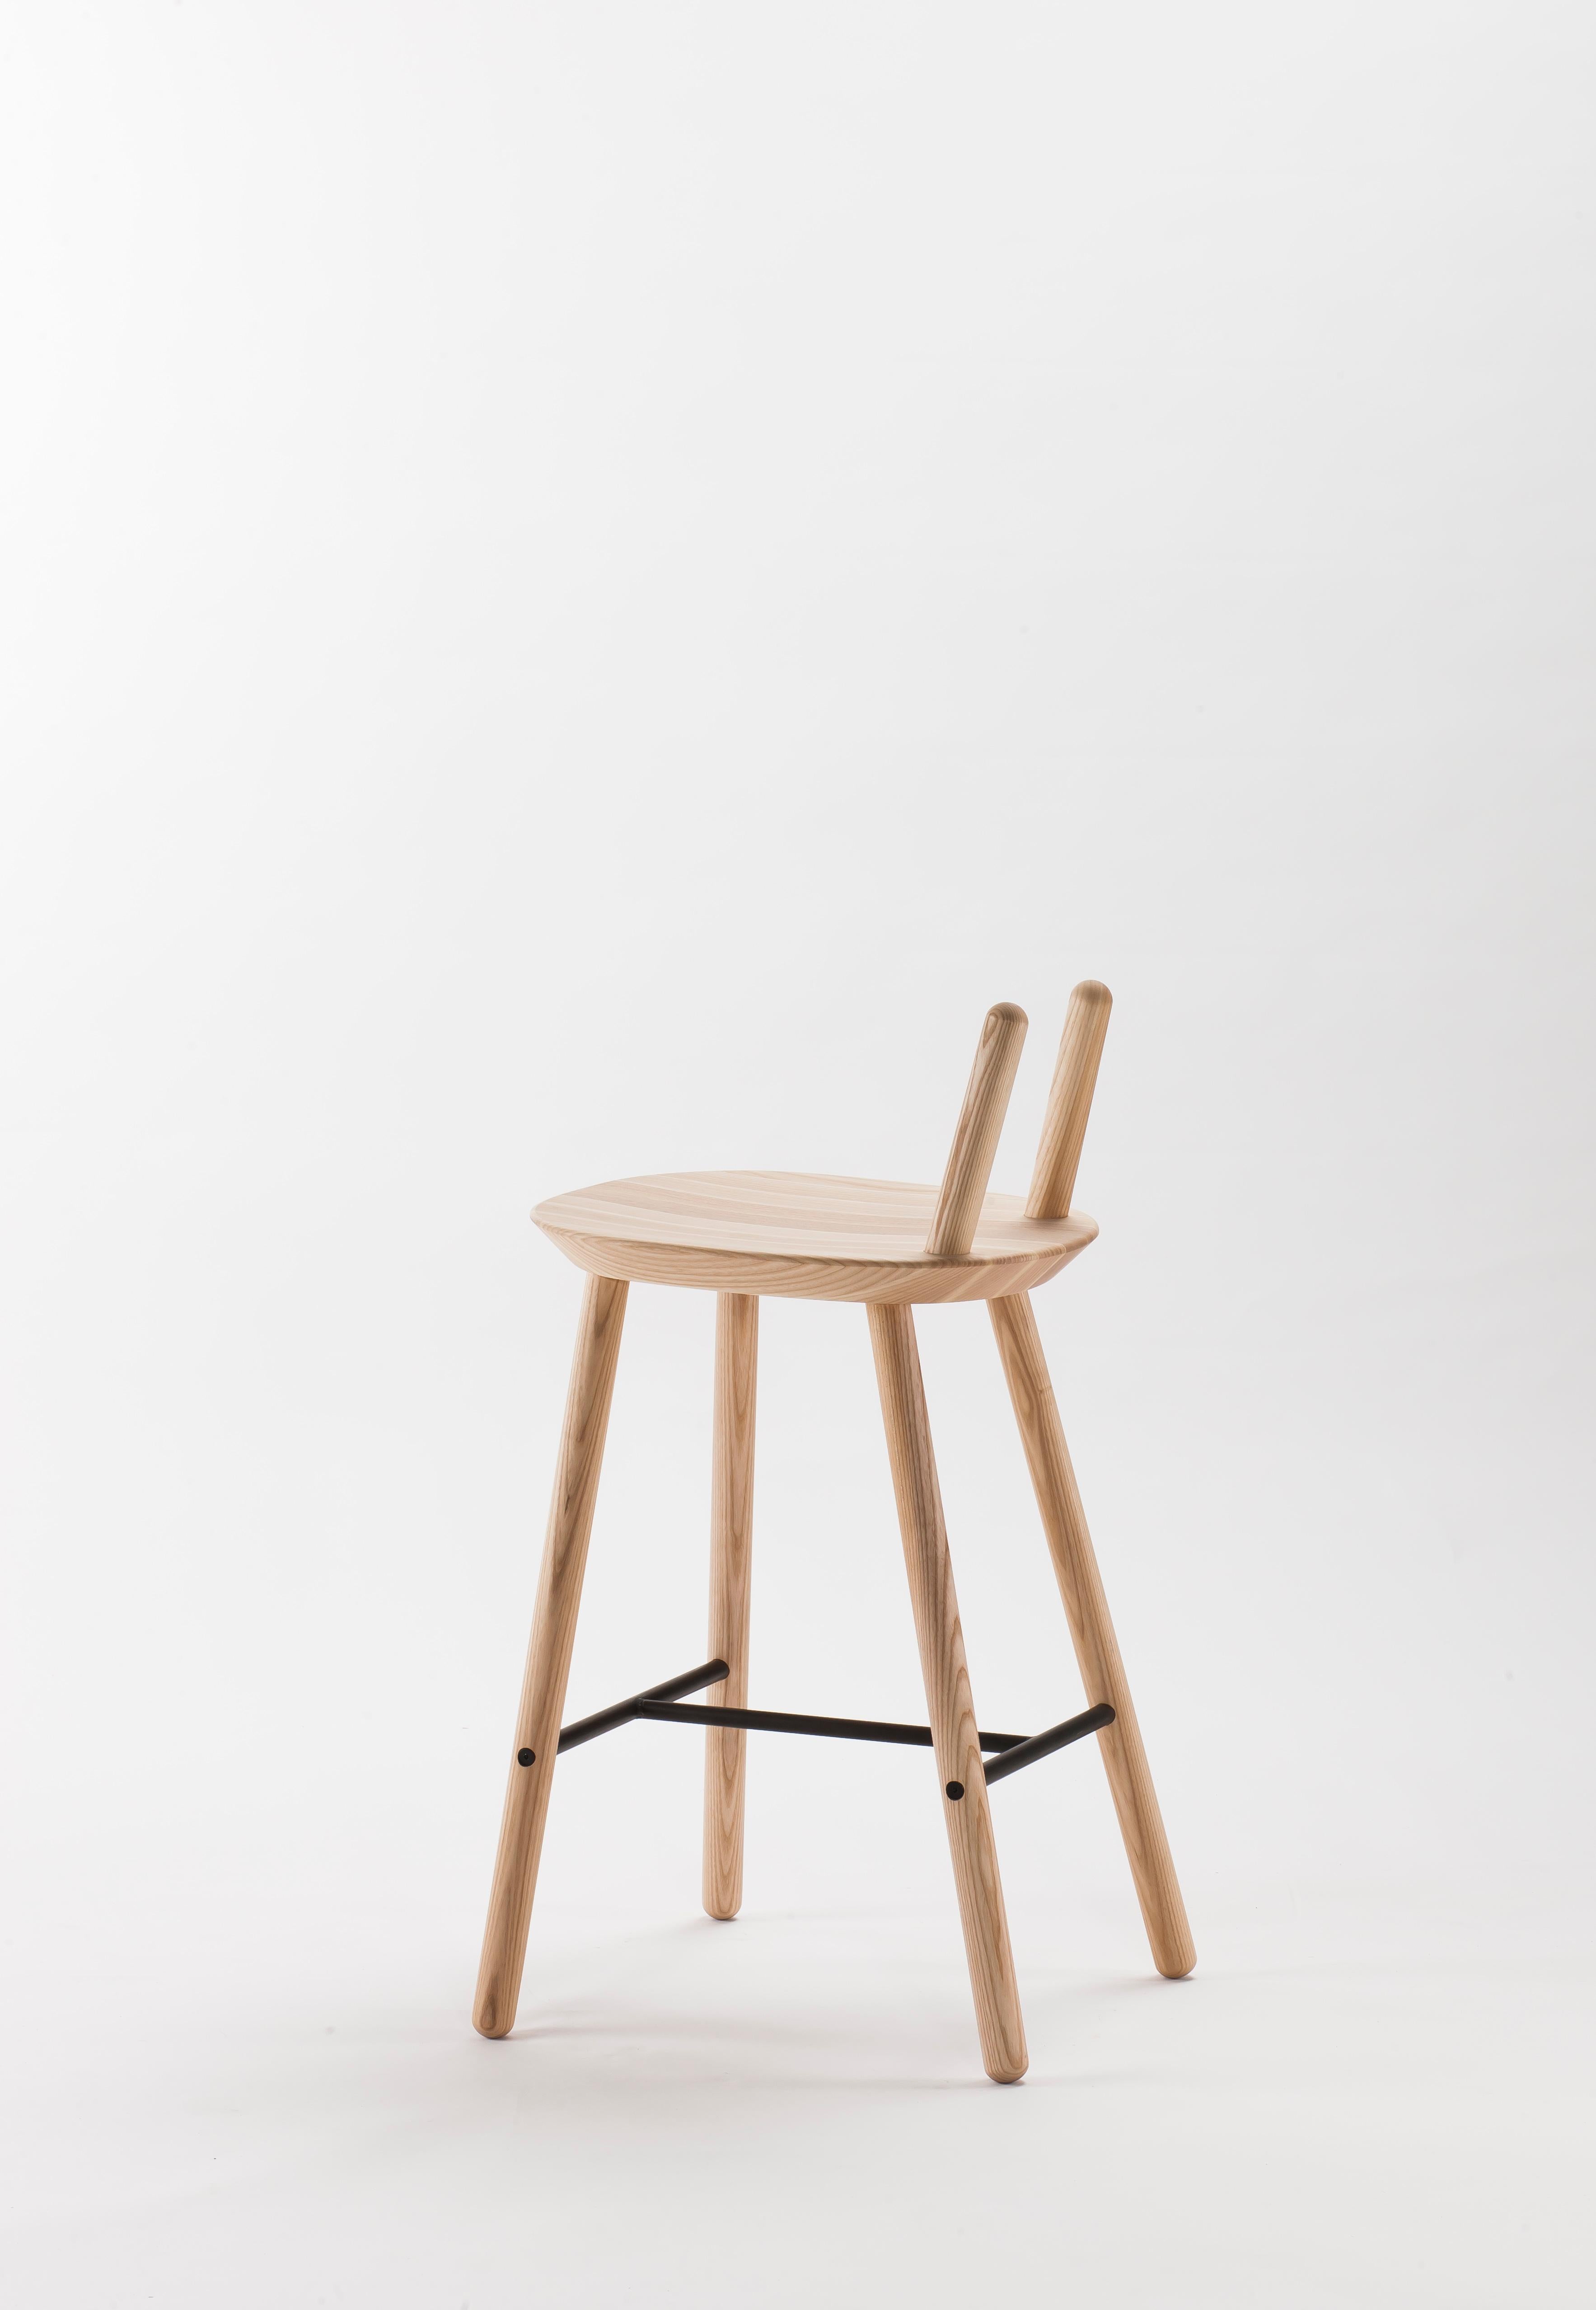 The Naïve semi bar stools stand out with their unique and recognizable character. A carved seat with a minimal backrest makes it comfortable enough for a long chat between friends, while durable steel footrest suits both home and public use.